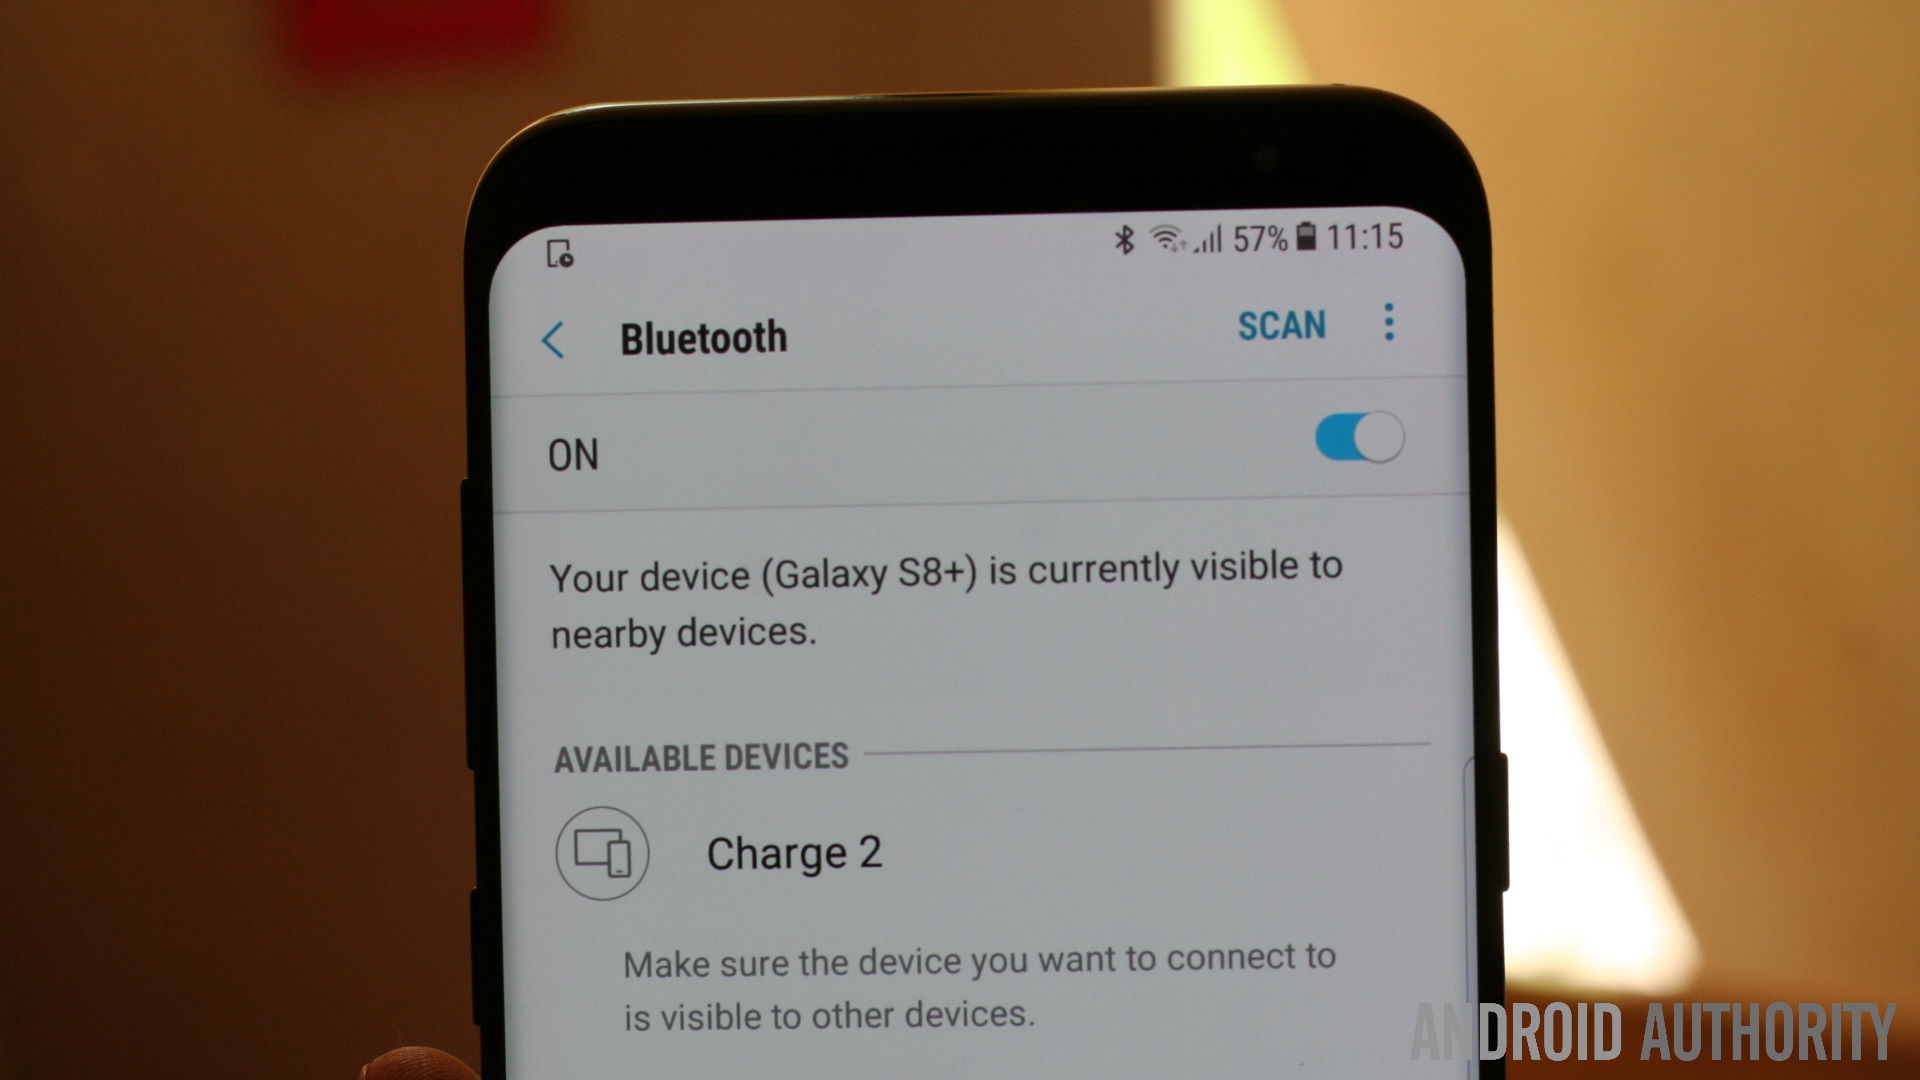 How To Reset Bluetooth on Android